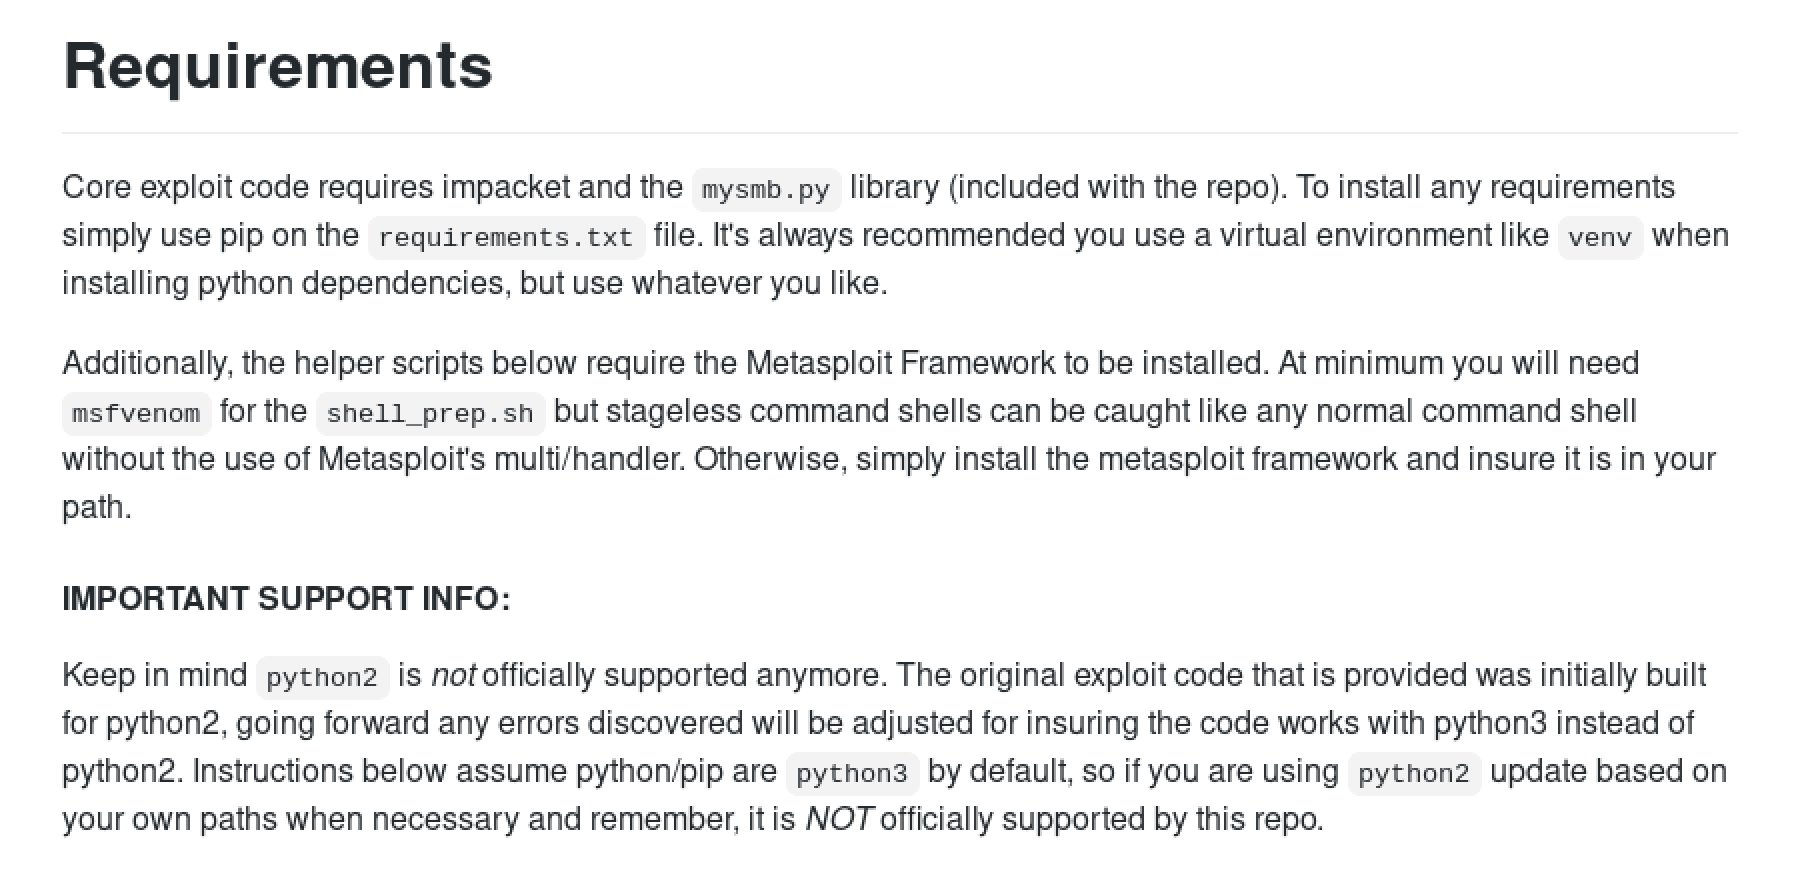 Requirements section from the GitHub page.